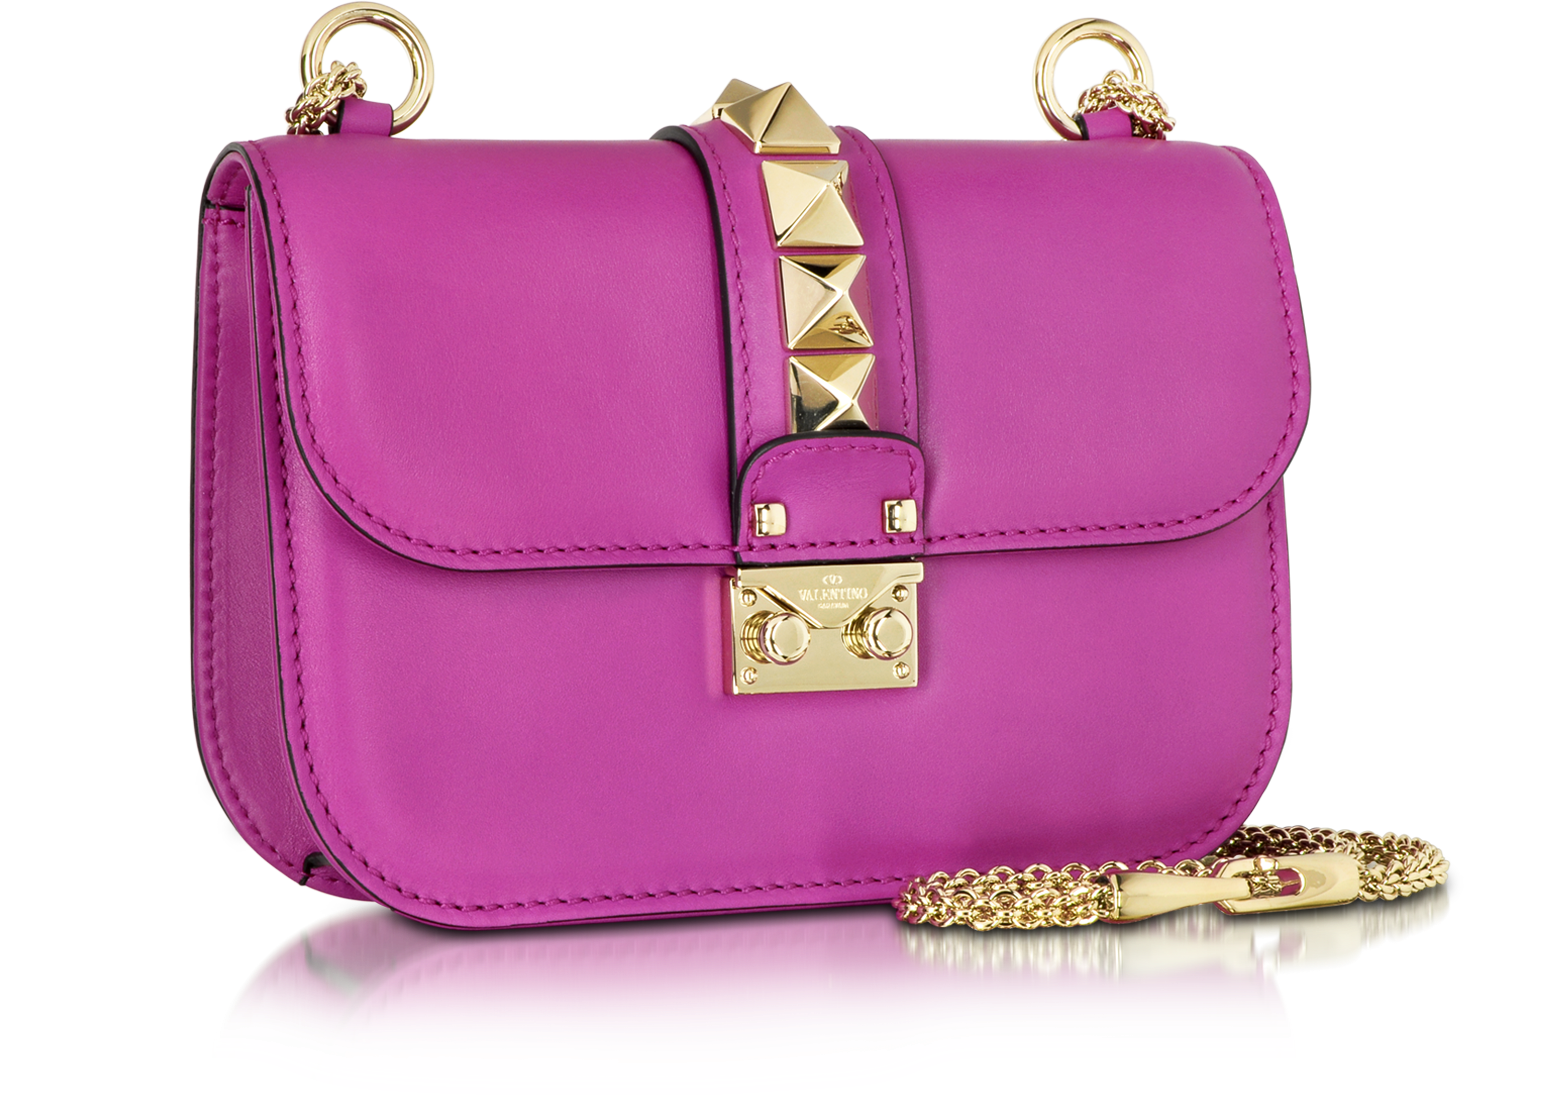 Valentino Fuxia Leather Shoulder Bag at FORZIERI